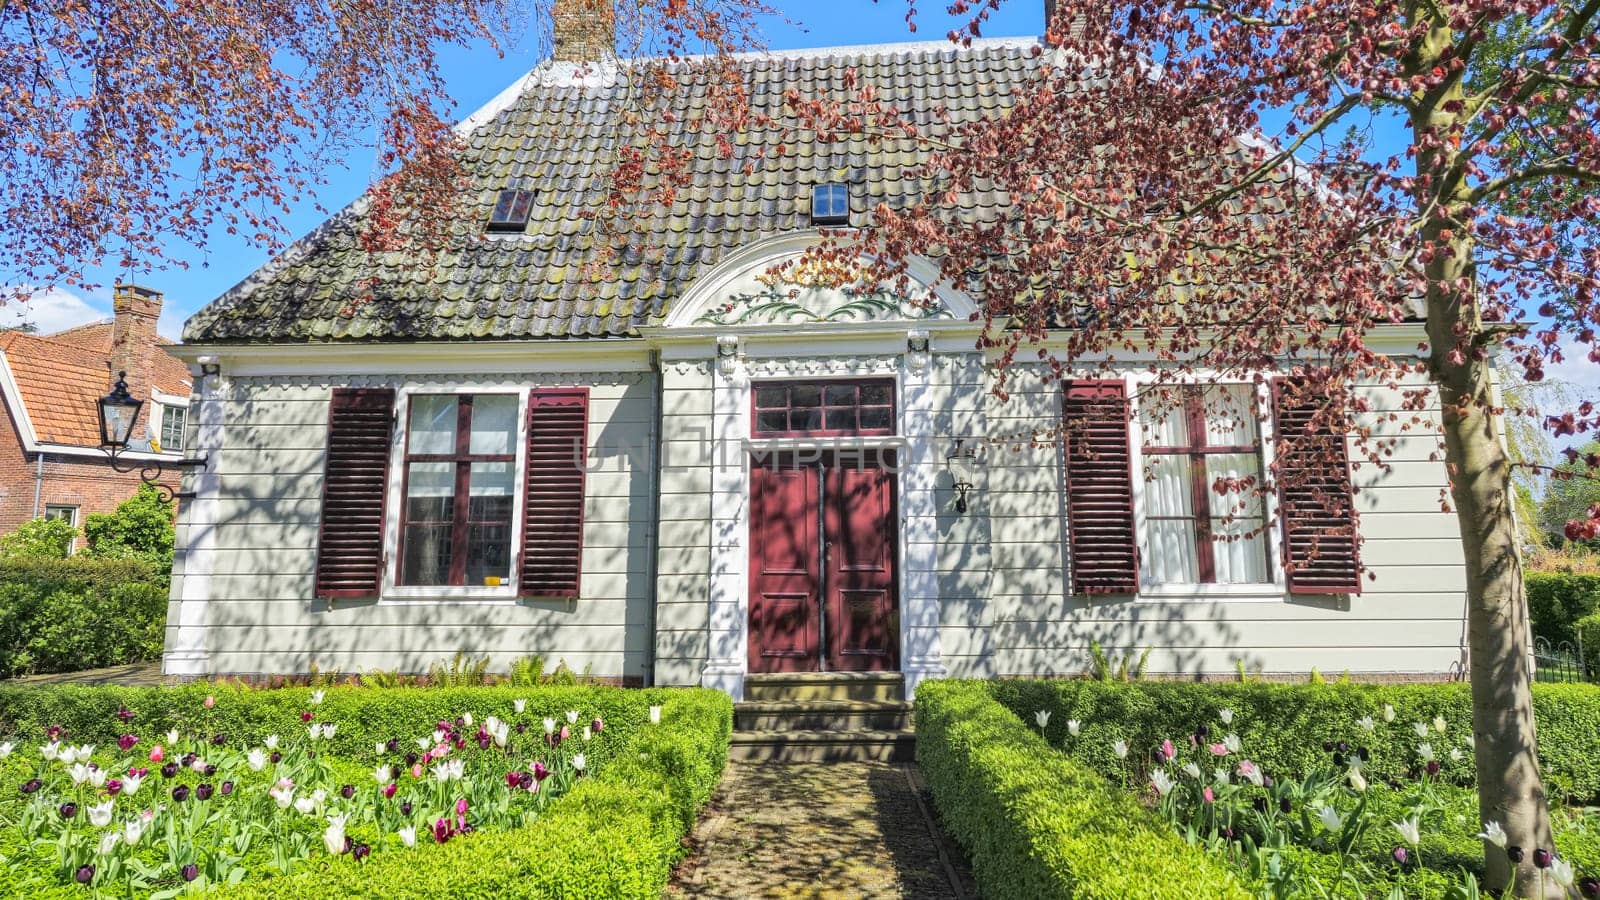 A charming white house adorned with vibrant red shutters and a inviting red door, standing out against a backdrop of greenery by fokkebok